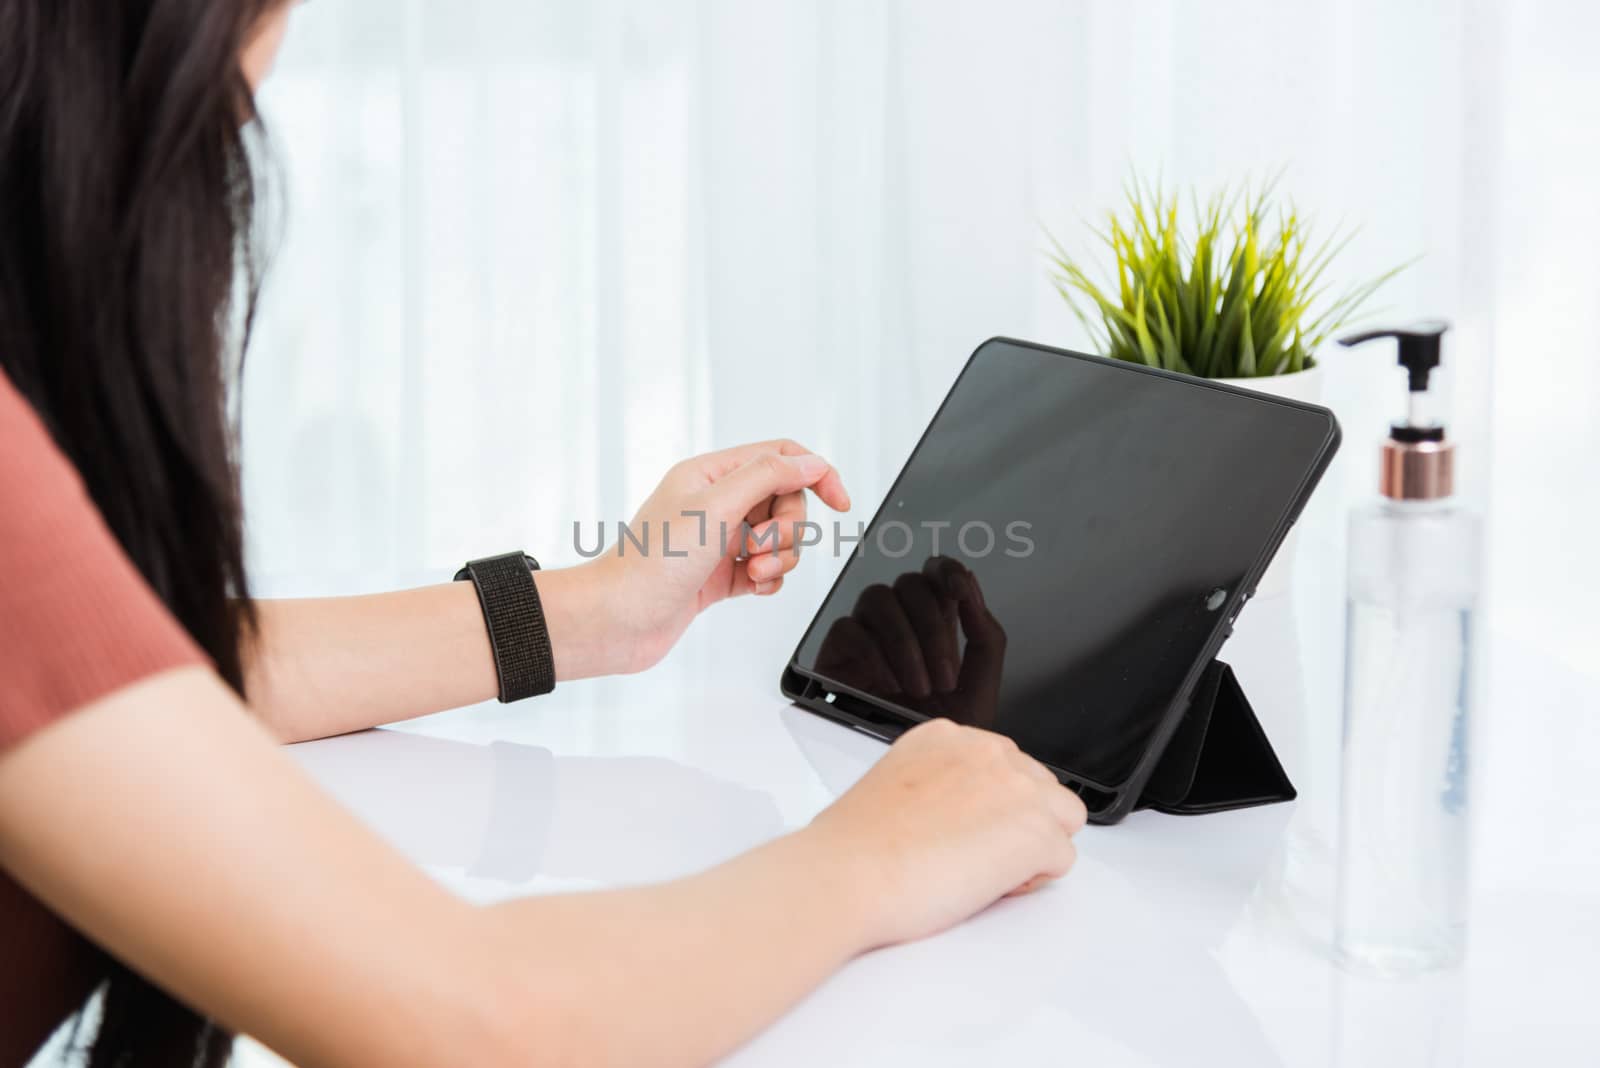 Work from home, Asian young businesswoman wearing face mas protactive video conference call or facetime touch digital smart tablet computer she meeting with colleagues on desk, situation coronavirus